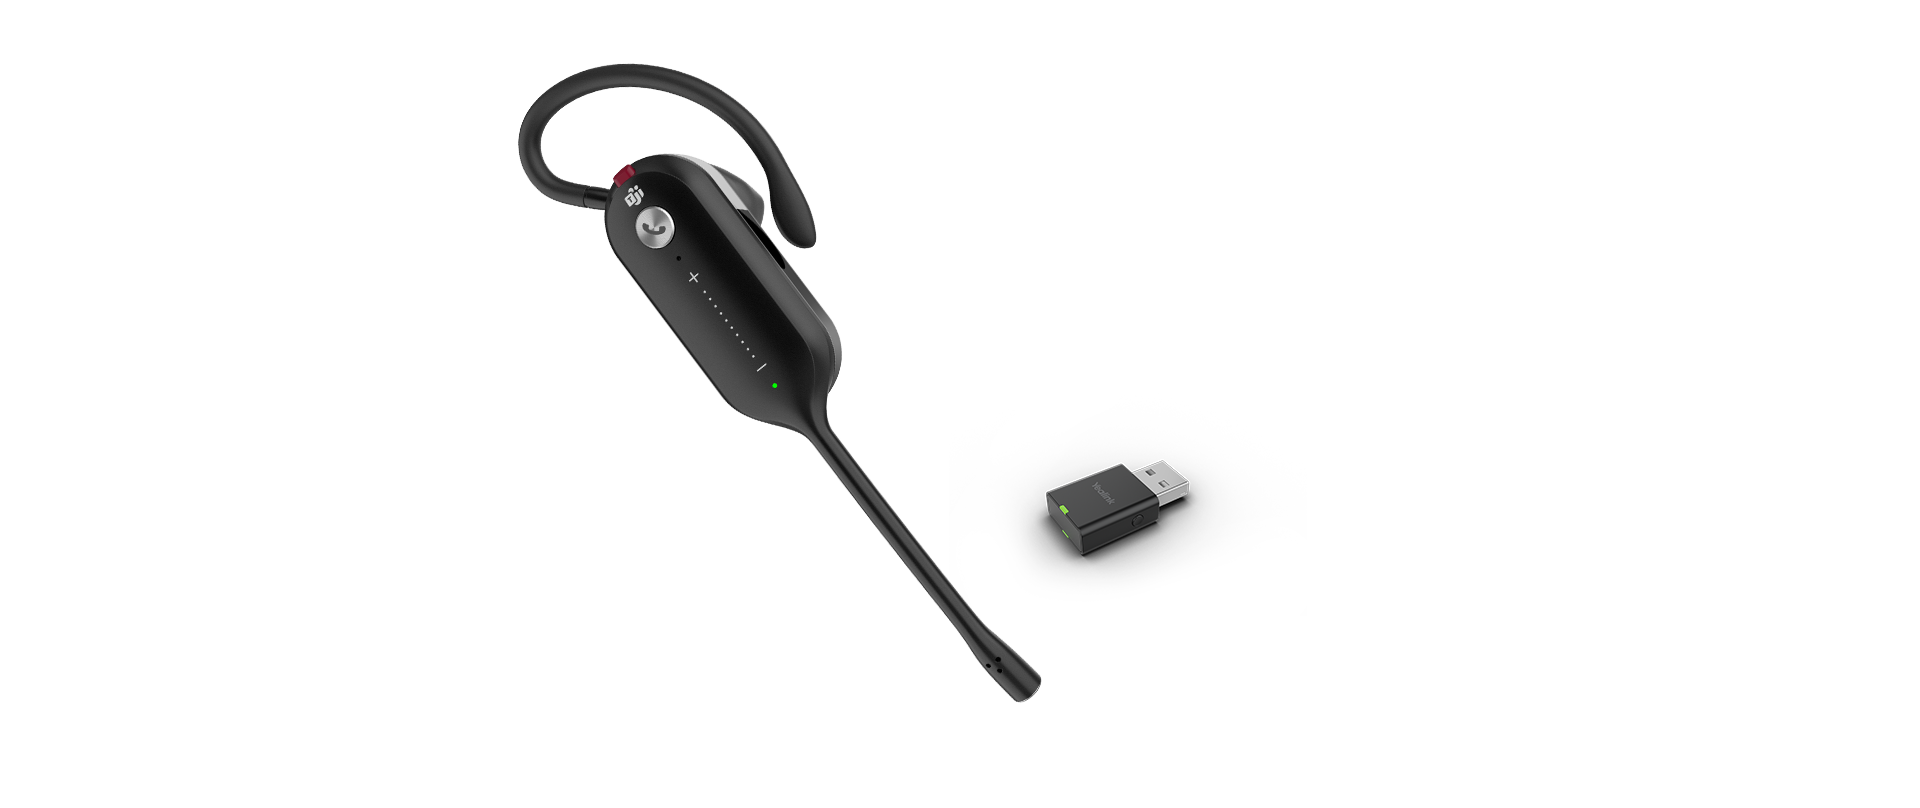 usb wired headset with mic,headset wireless